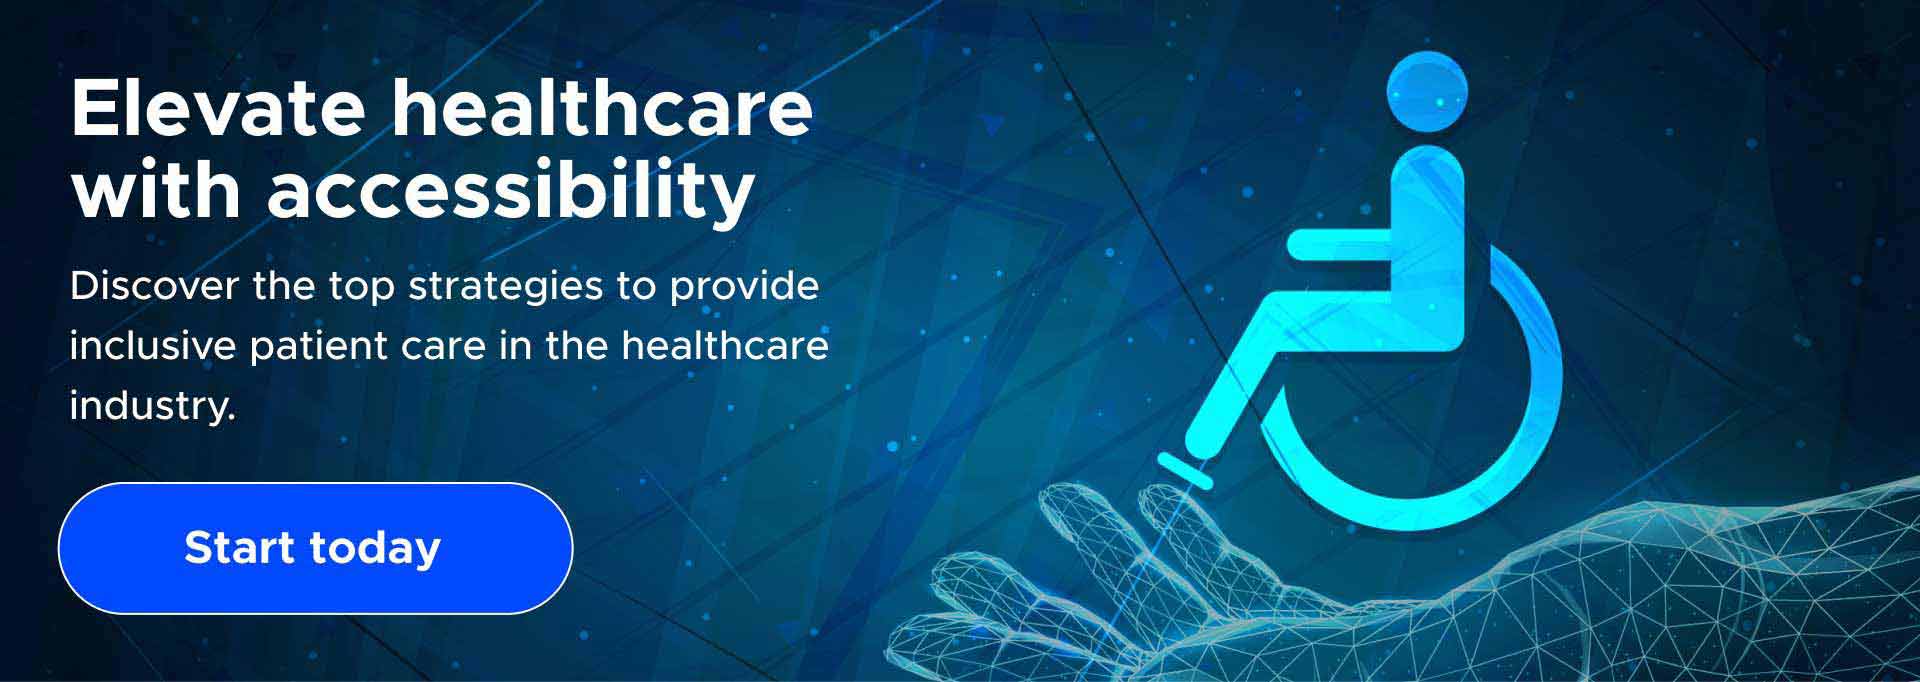 Discover the top strategies to provide inclusive patient care in the healthcare industry. 